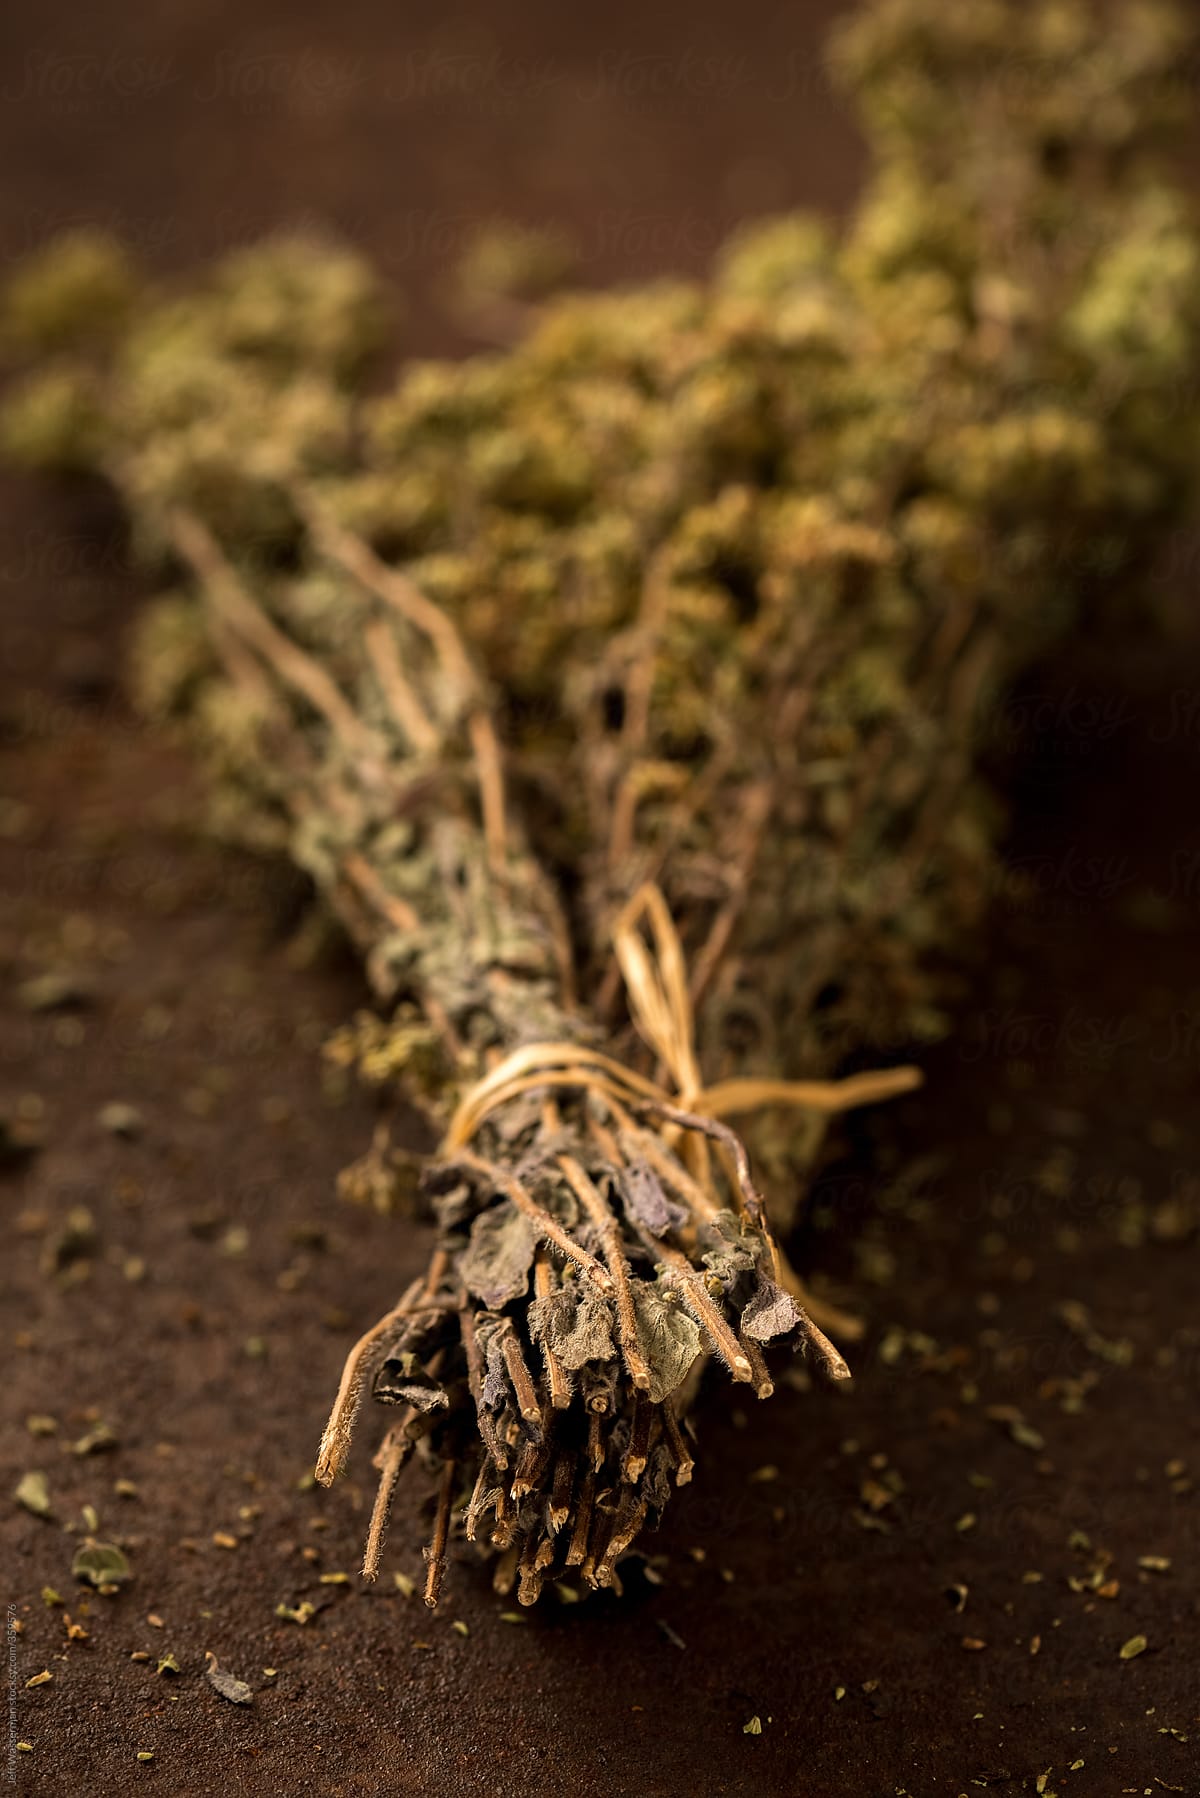 Dried Oregano Cluster in Closeup View From Bottom